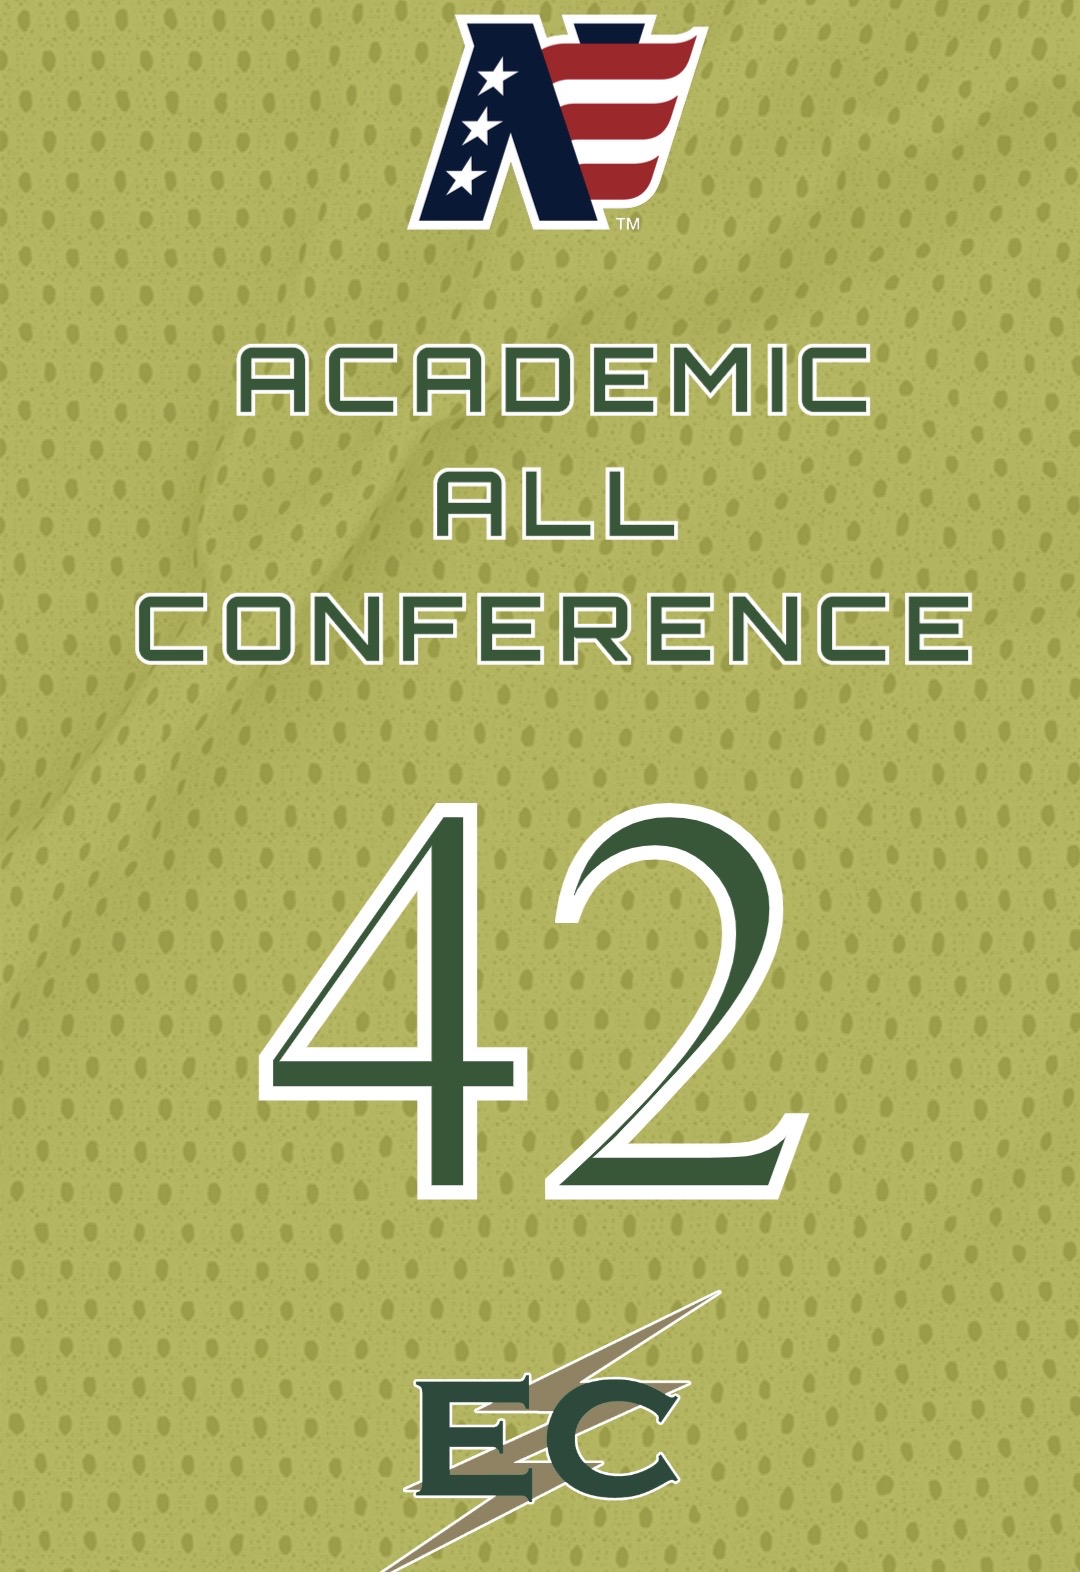 Blazers lead the way with 42 Academic All-Conference Honorees